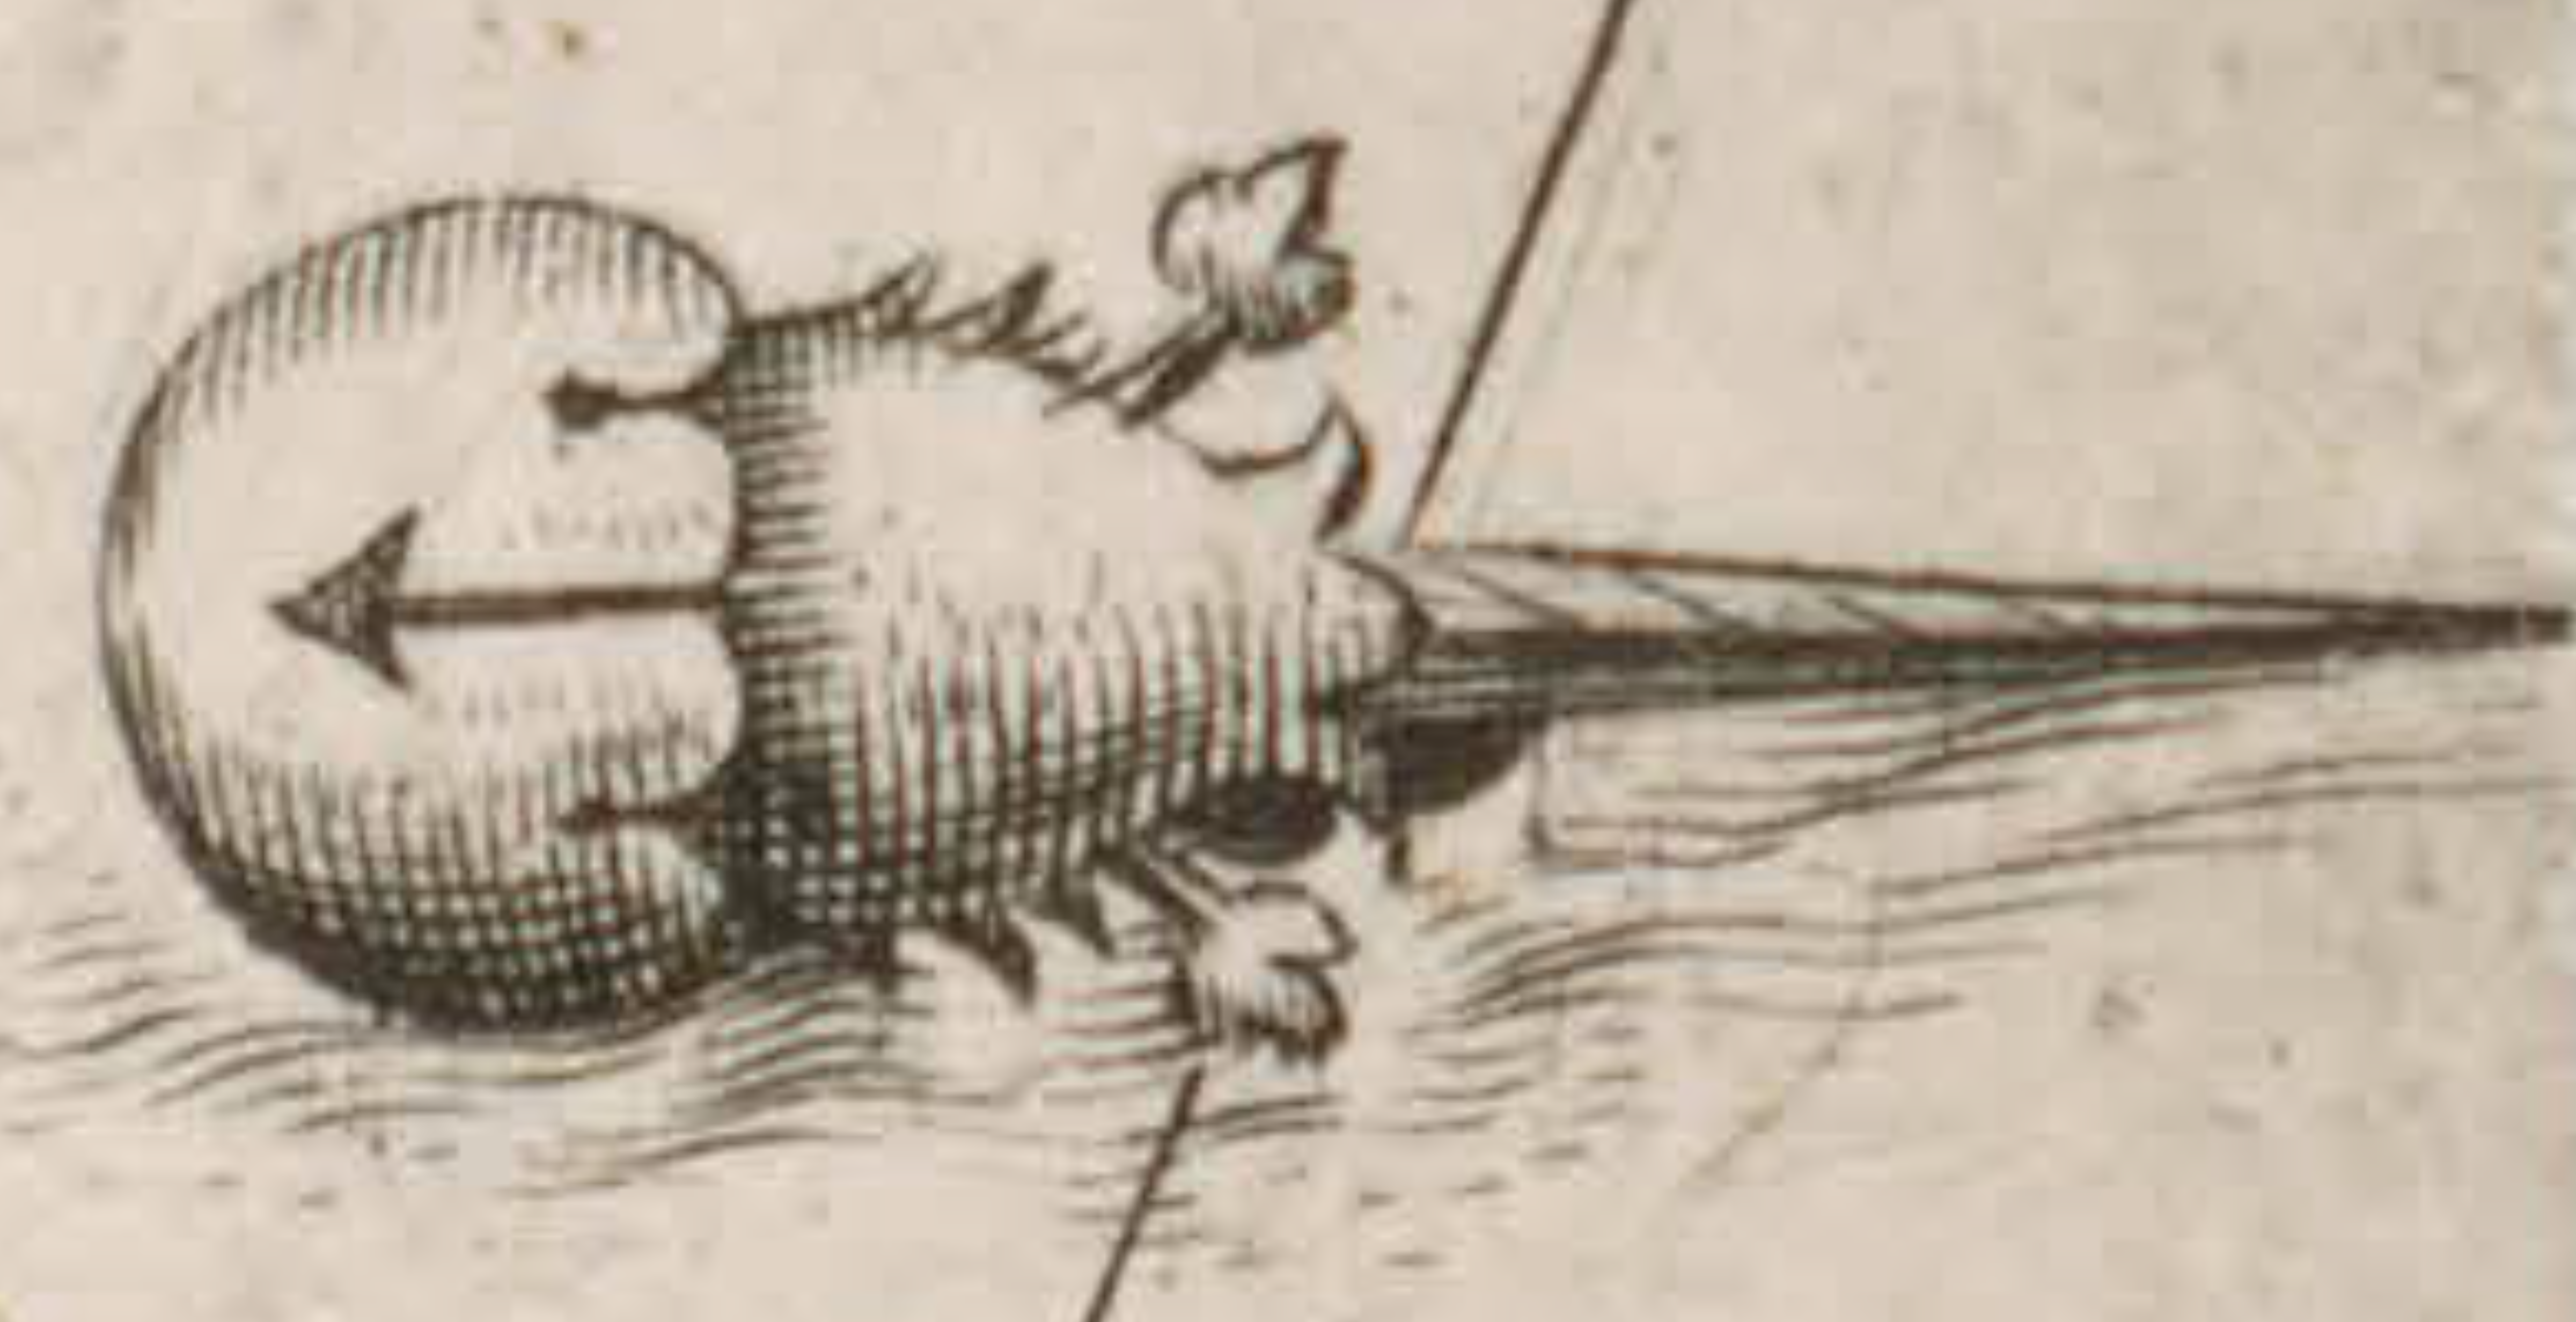 Drawing detail of a map drawn by Samuel de Champlain showing a horseshoe crab